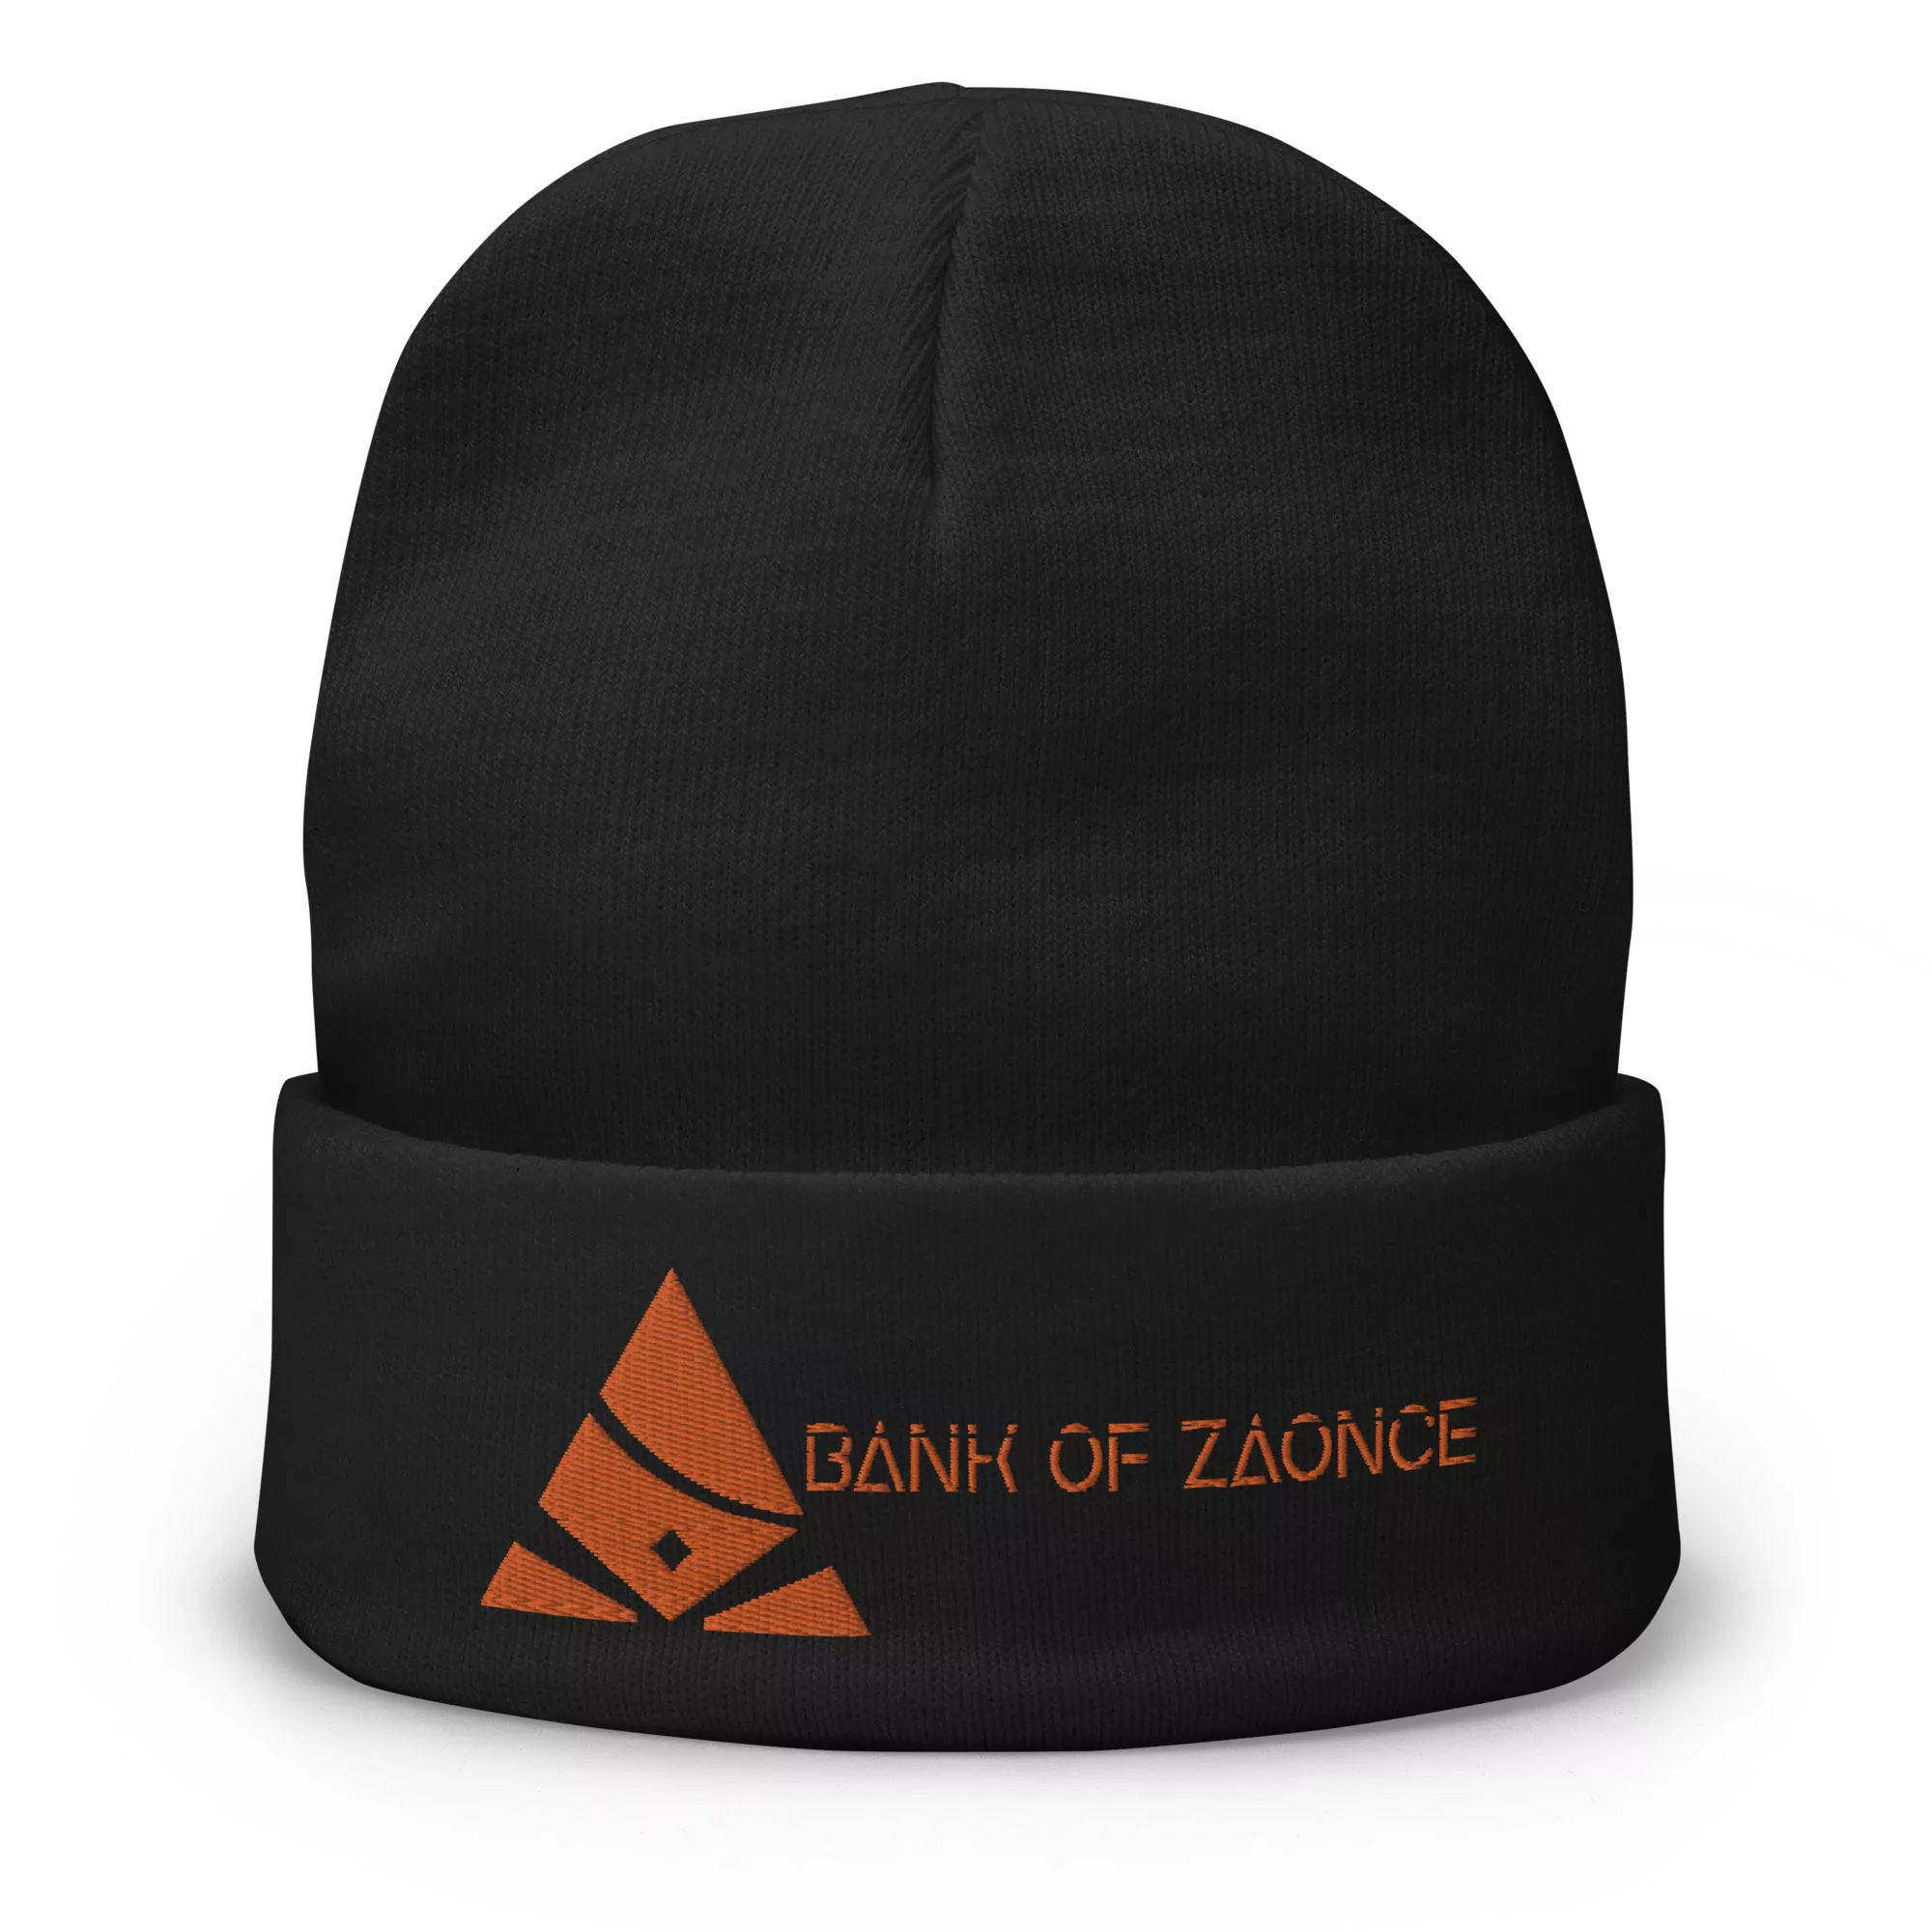 Black knit beanie with Bank of Zaonce logo embroidered in orange